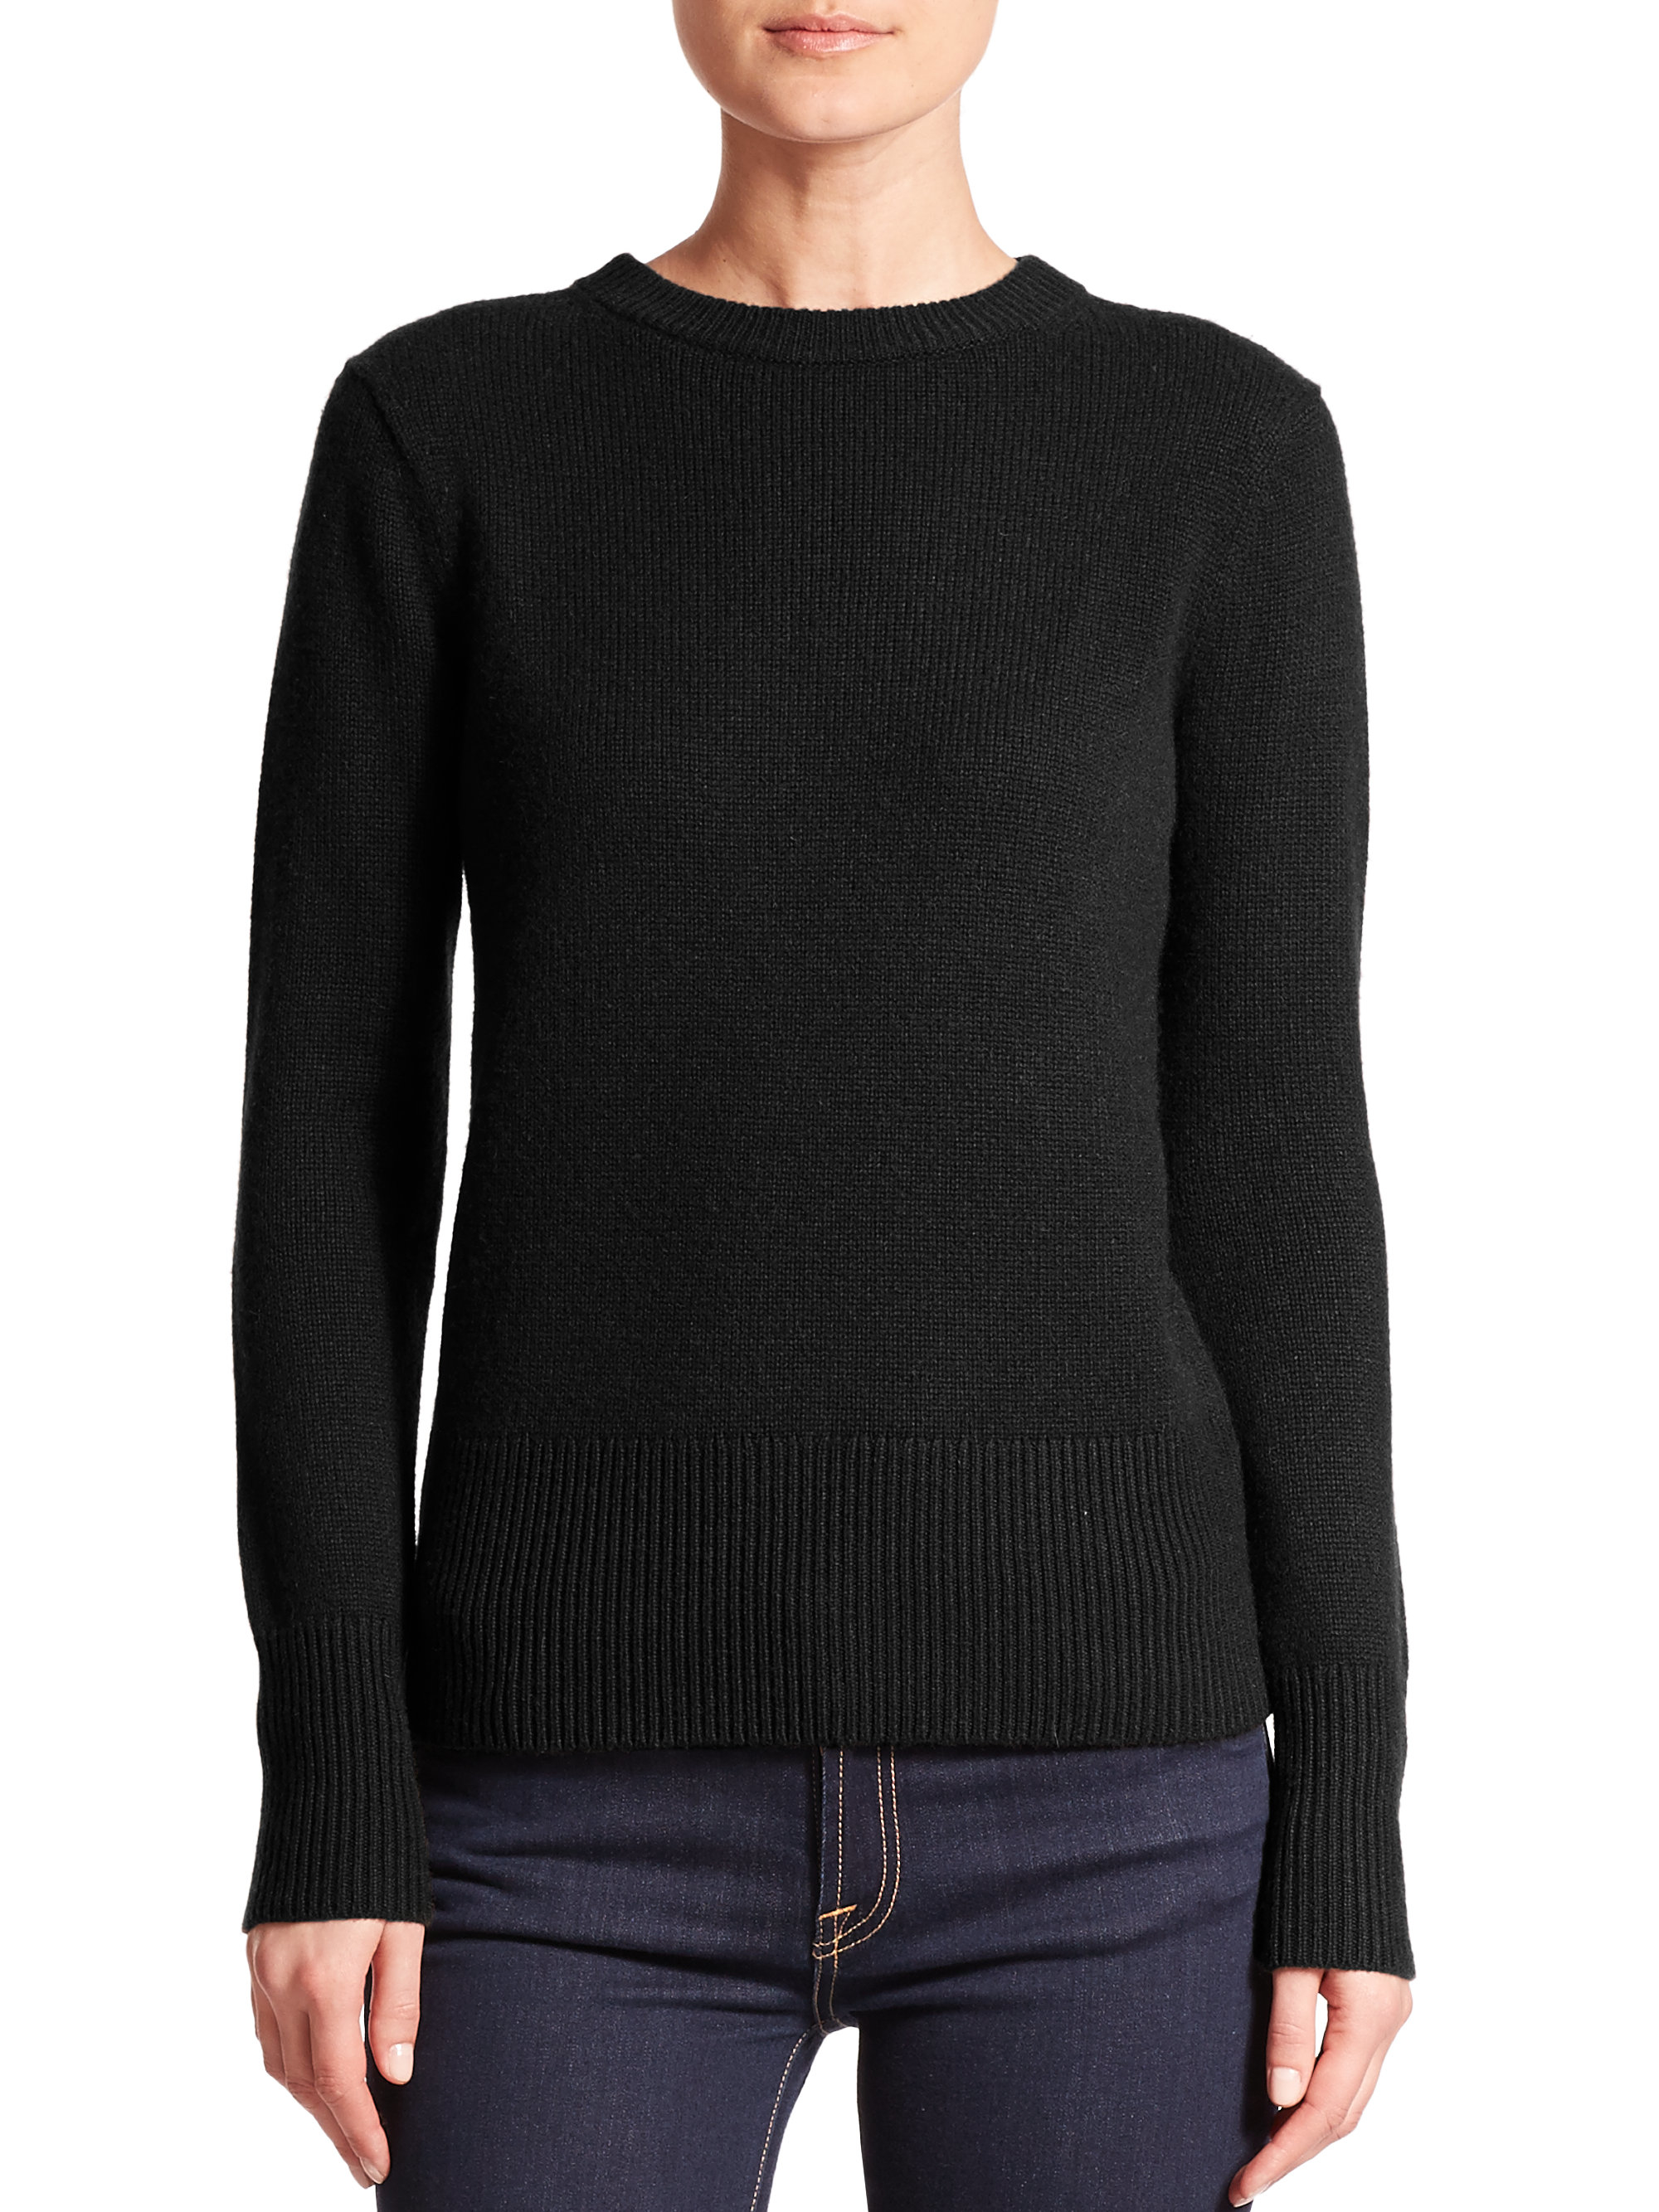 Lyst - Theory Salomay Cashmere Sweater in Black